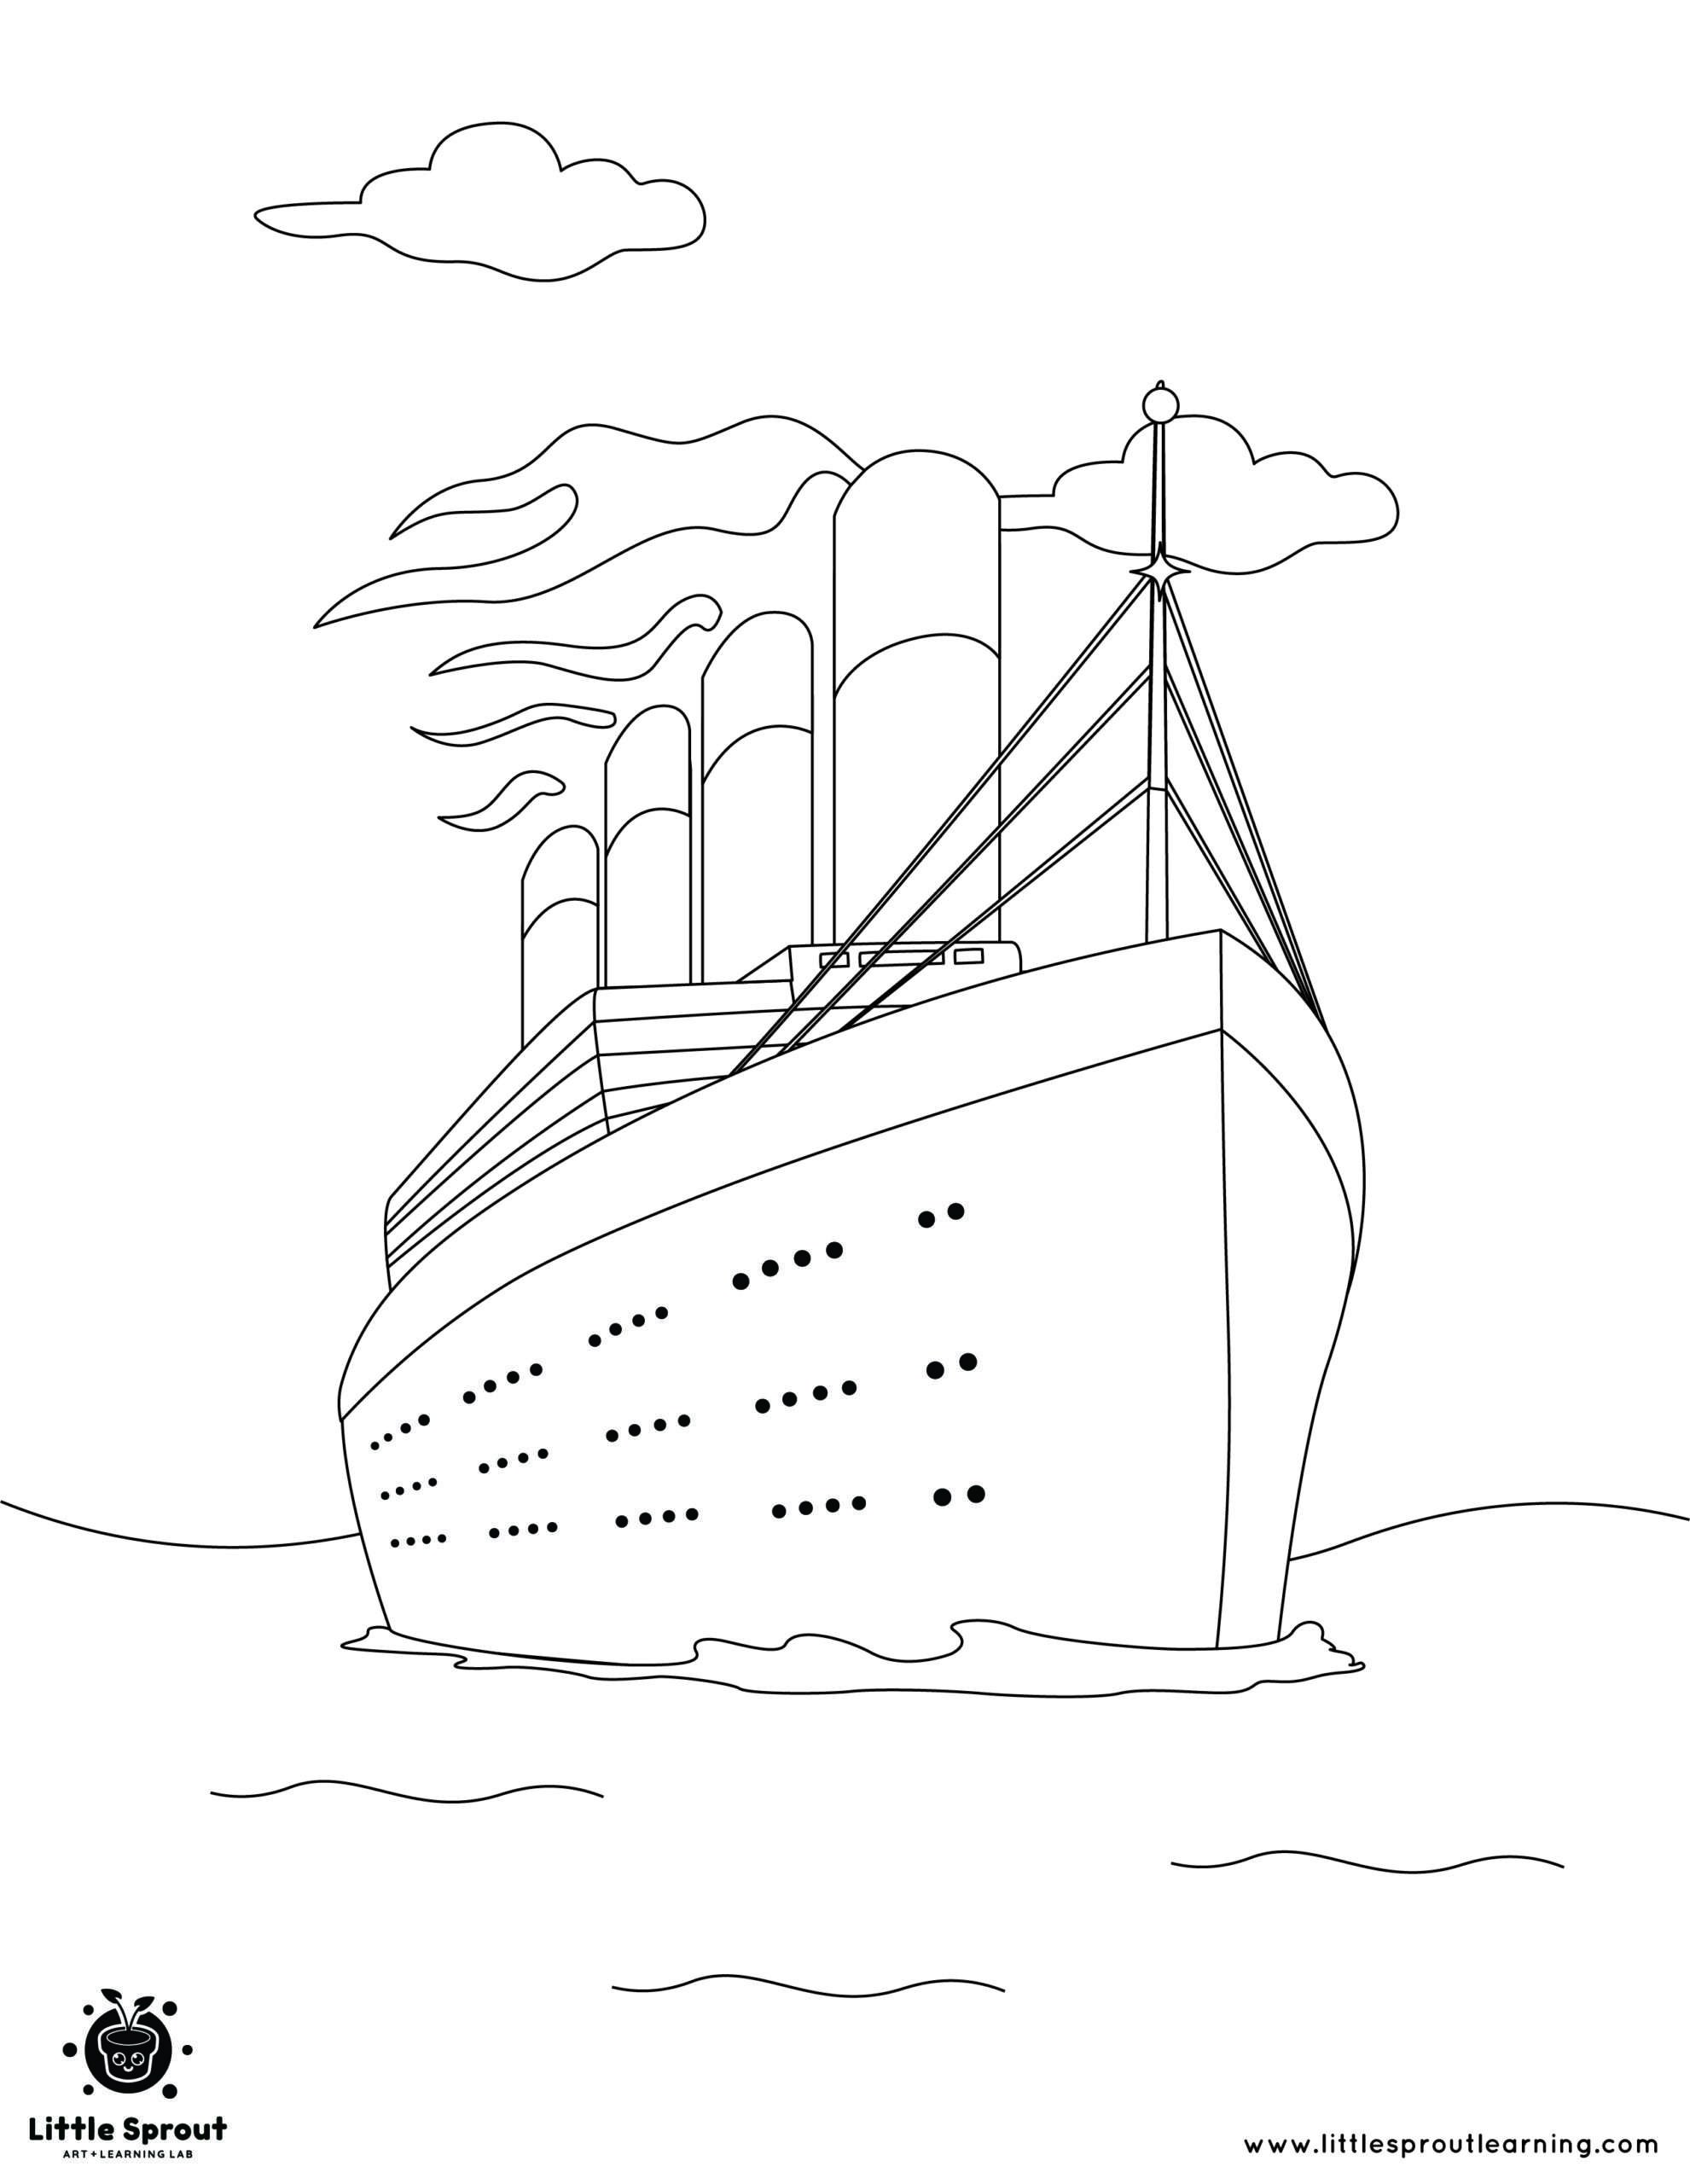 Titanic Sailing Across The Ocean Coloring Page